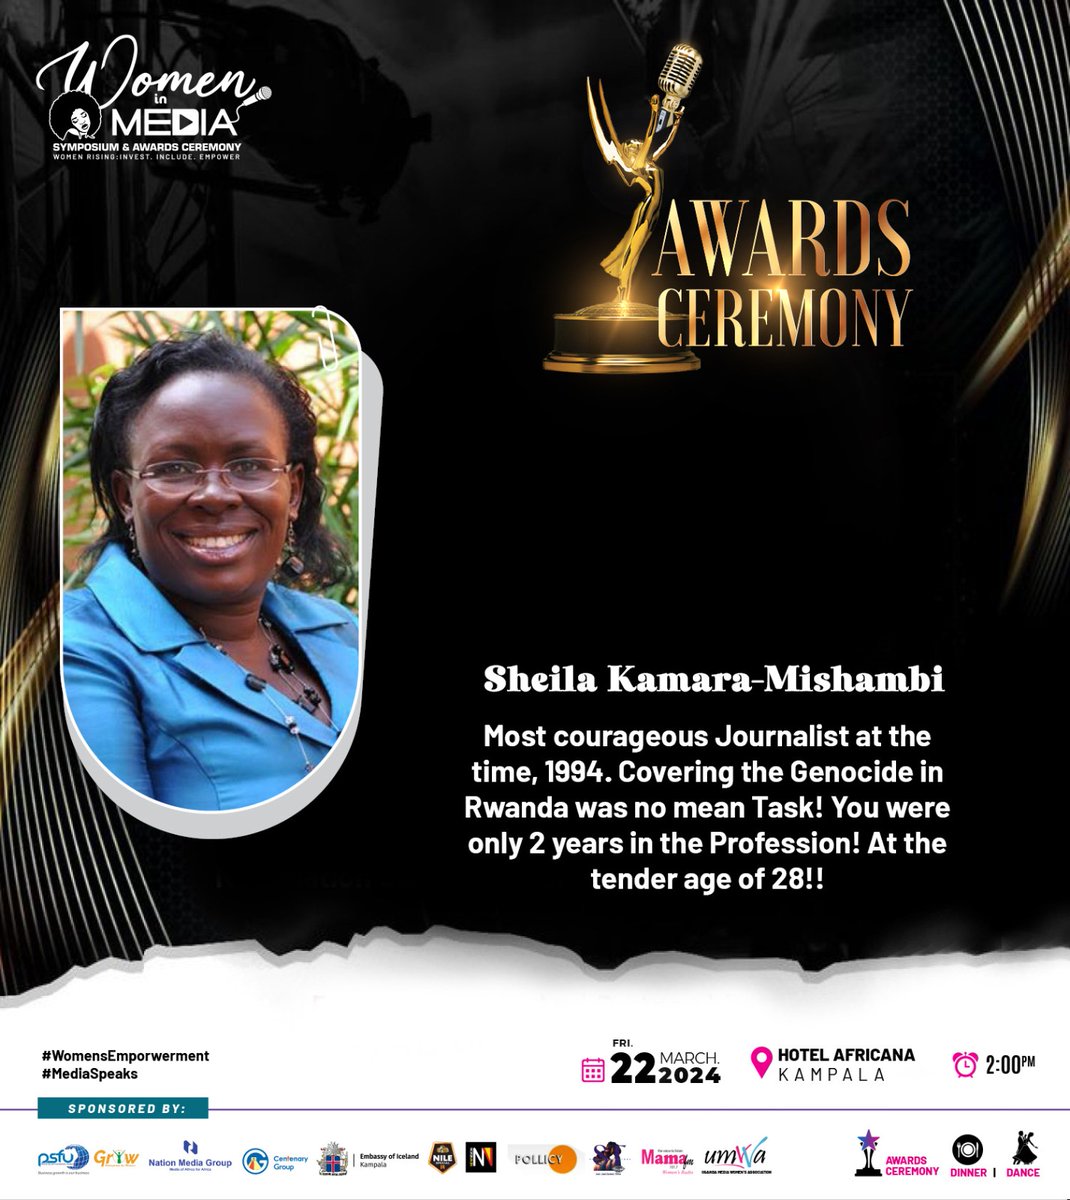 A standing ovation for @sheilakawamara, recognized as the Most Courageous Journalist in 1994. Covering the harrowing Genocide in Rwanda at just 28, with only 2 years in the profession, exemplifies her bravery and dedication to truth-telling.#WomenInMedia @Patricia_Litho